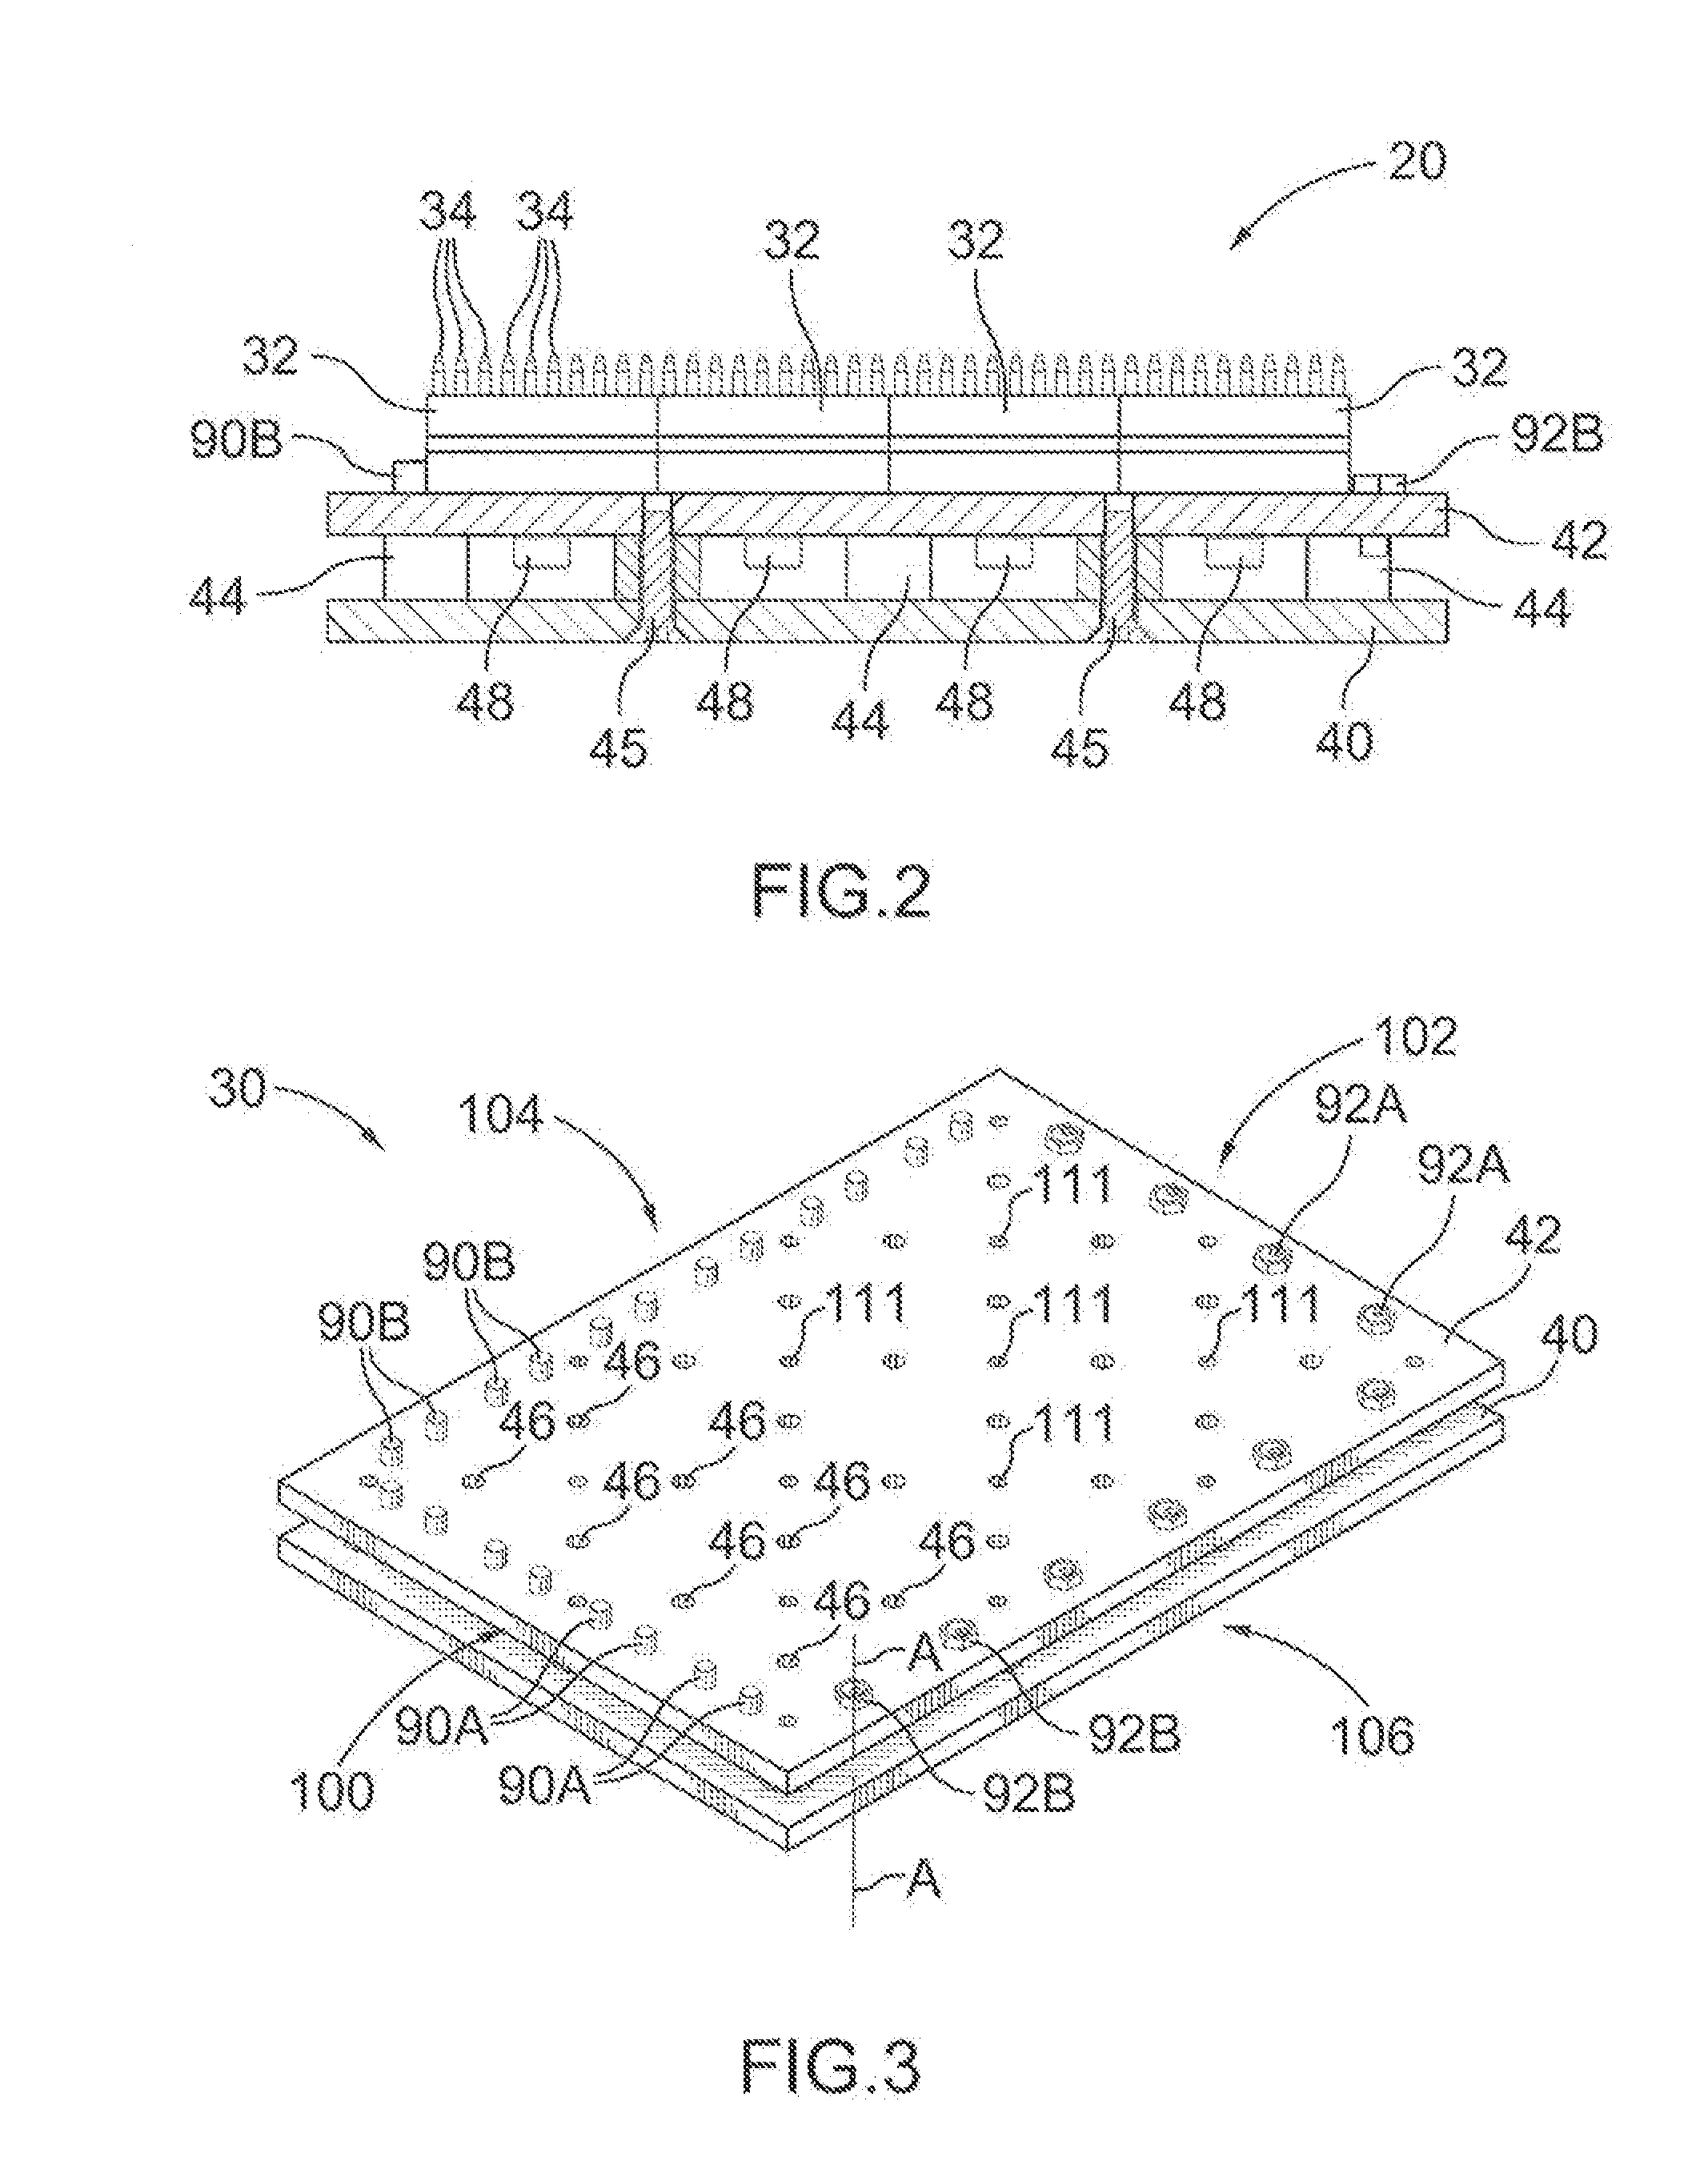 Apparatus and Methods for Perforating Leather Using Perforation Tiles